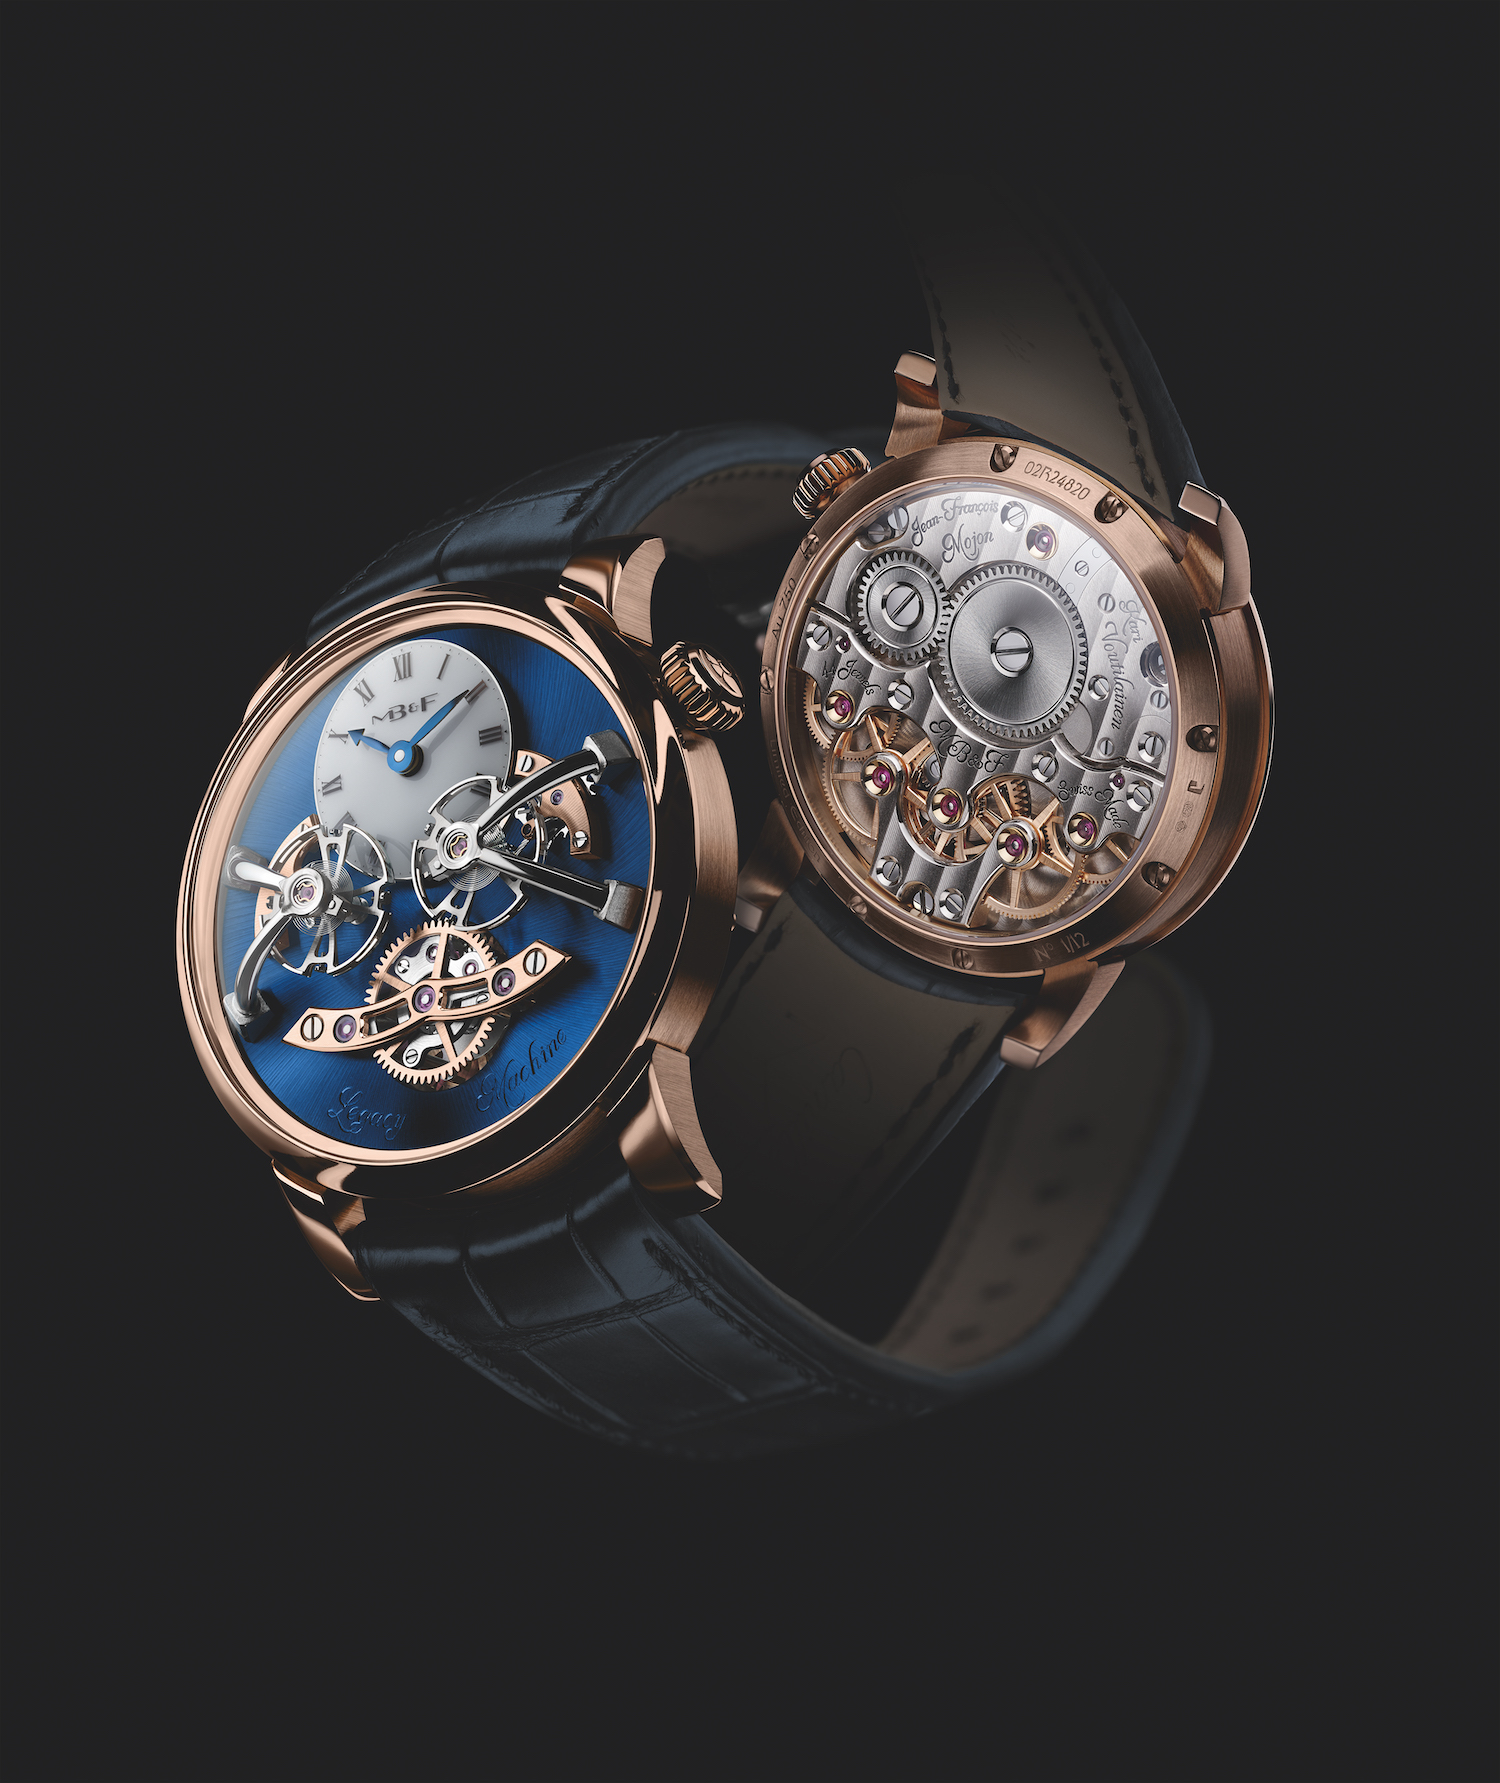 mb&f watches watch models novelties 2023 trends luxurious timepieces futuristic